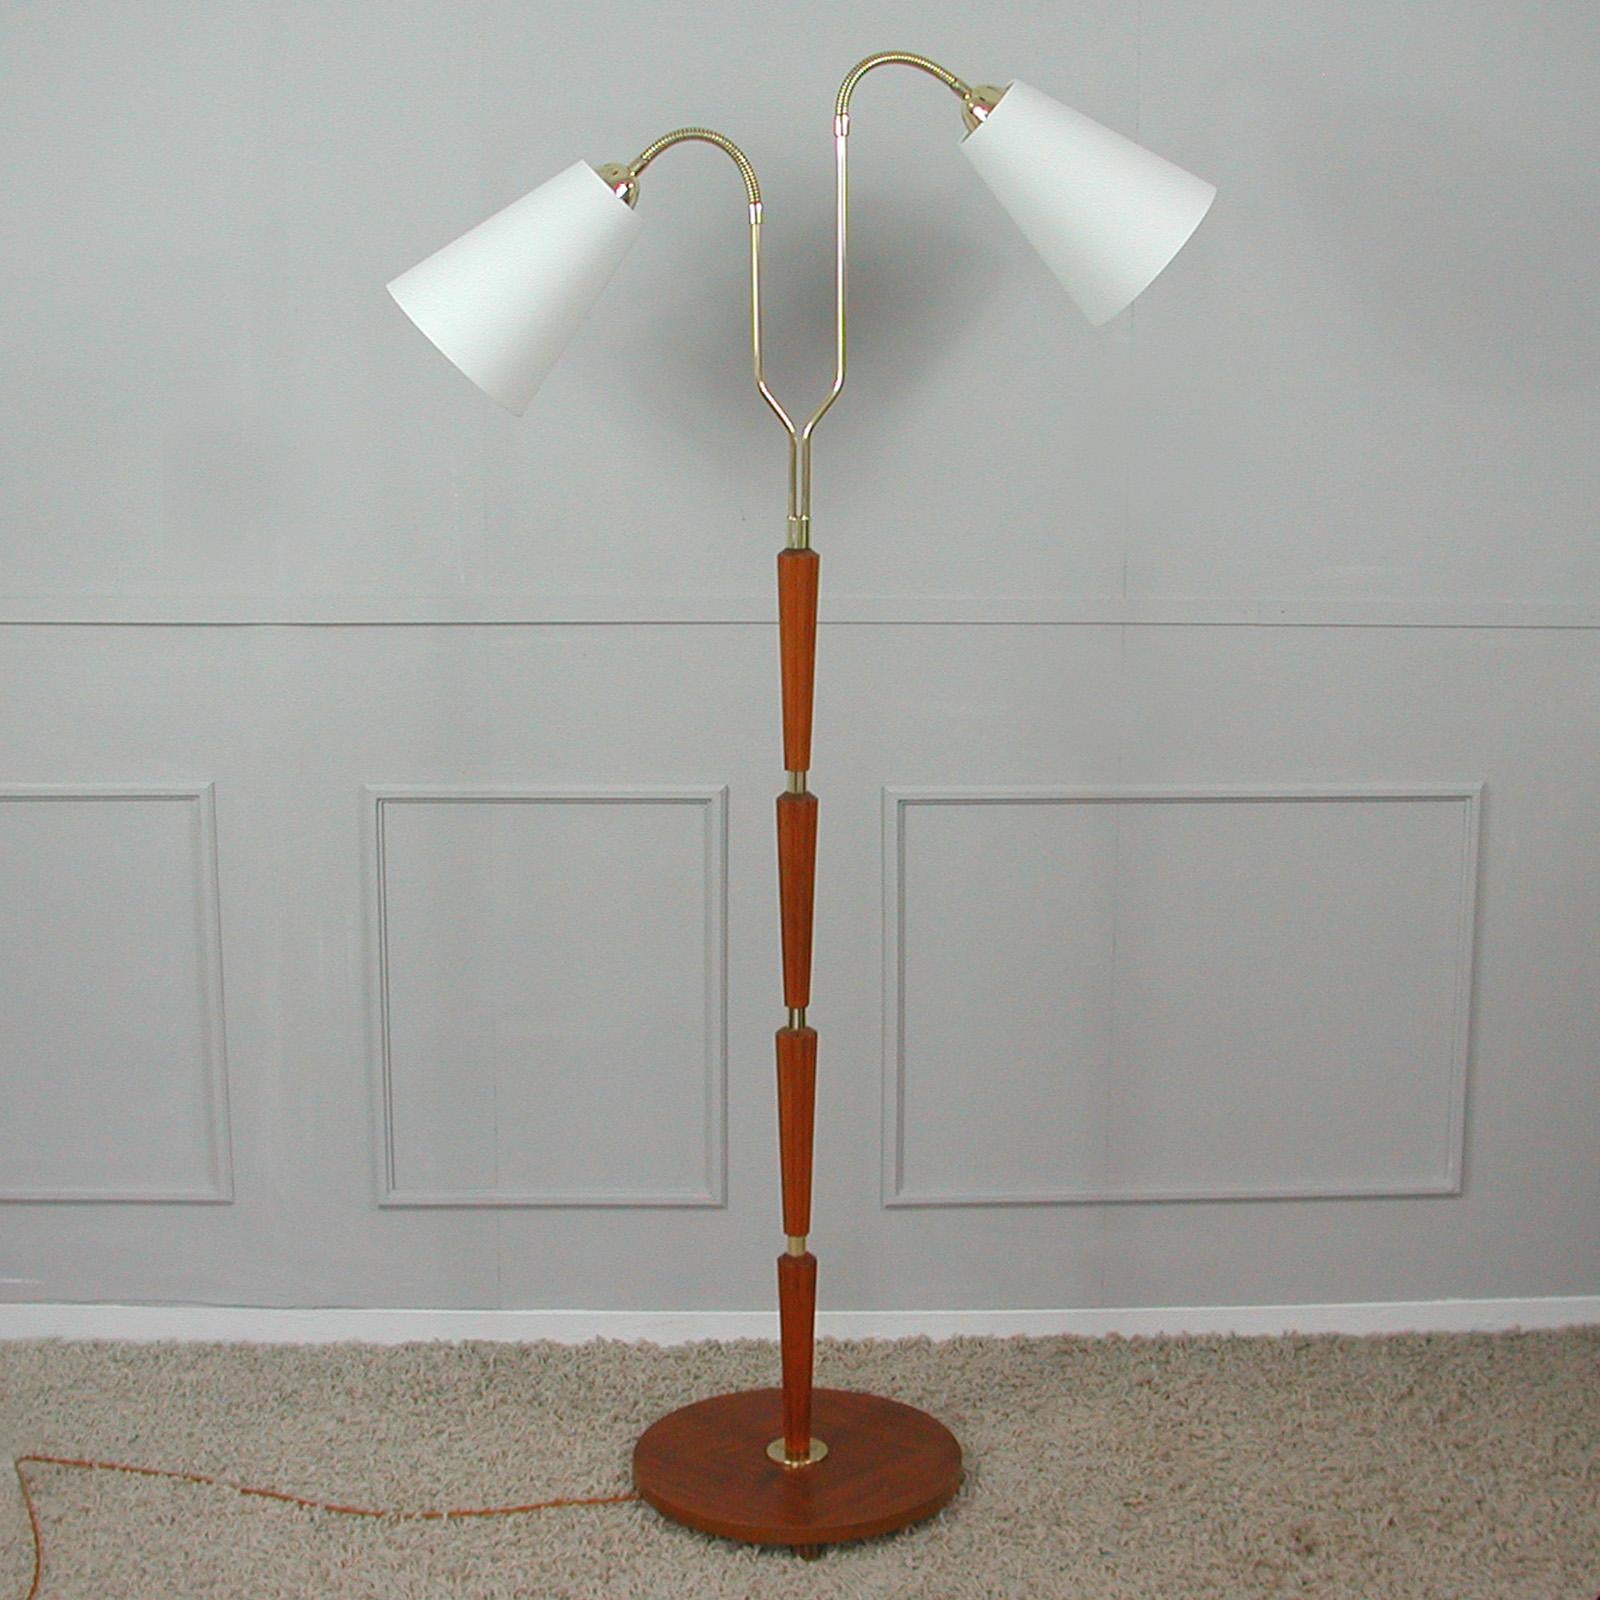 This unusual organic floor lamp was designed and manufactured in Sweden in the 1940s. It features a teak lamp base, brass hardware and two adjustable gooseneck lamp arms. Shades are handmade in off white silk (new). 

The floor lamp can be